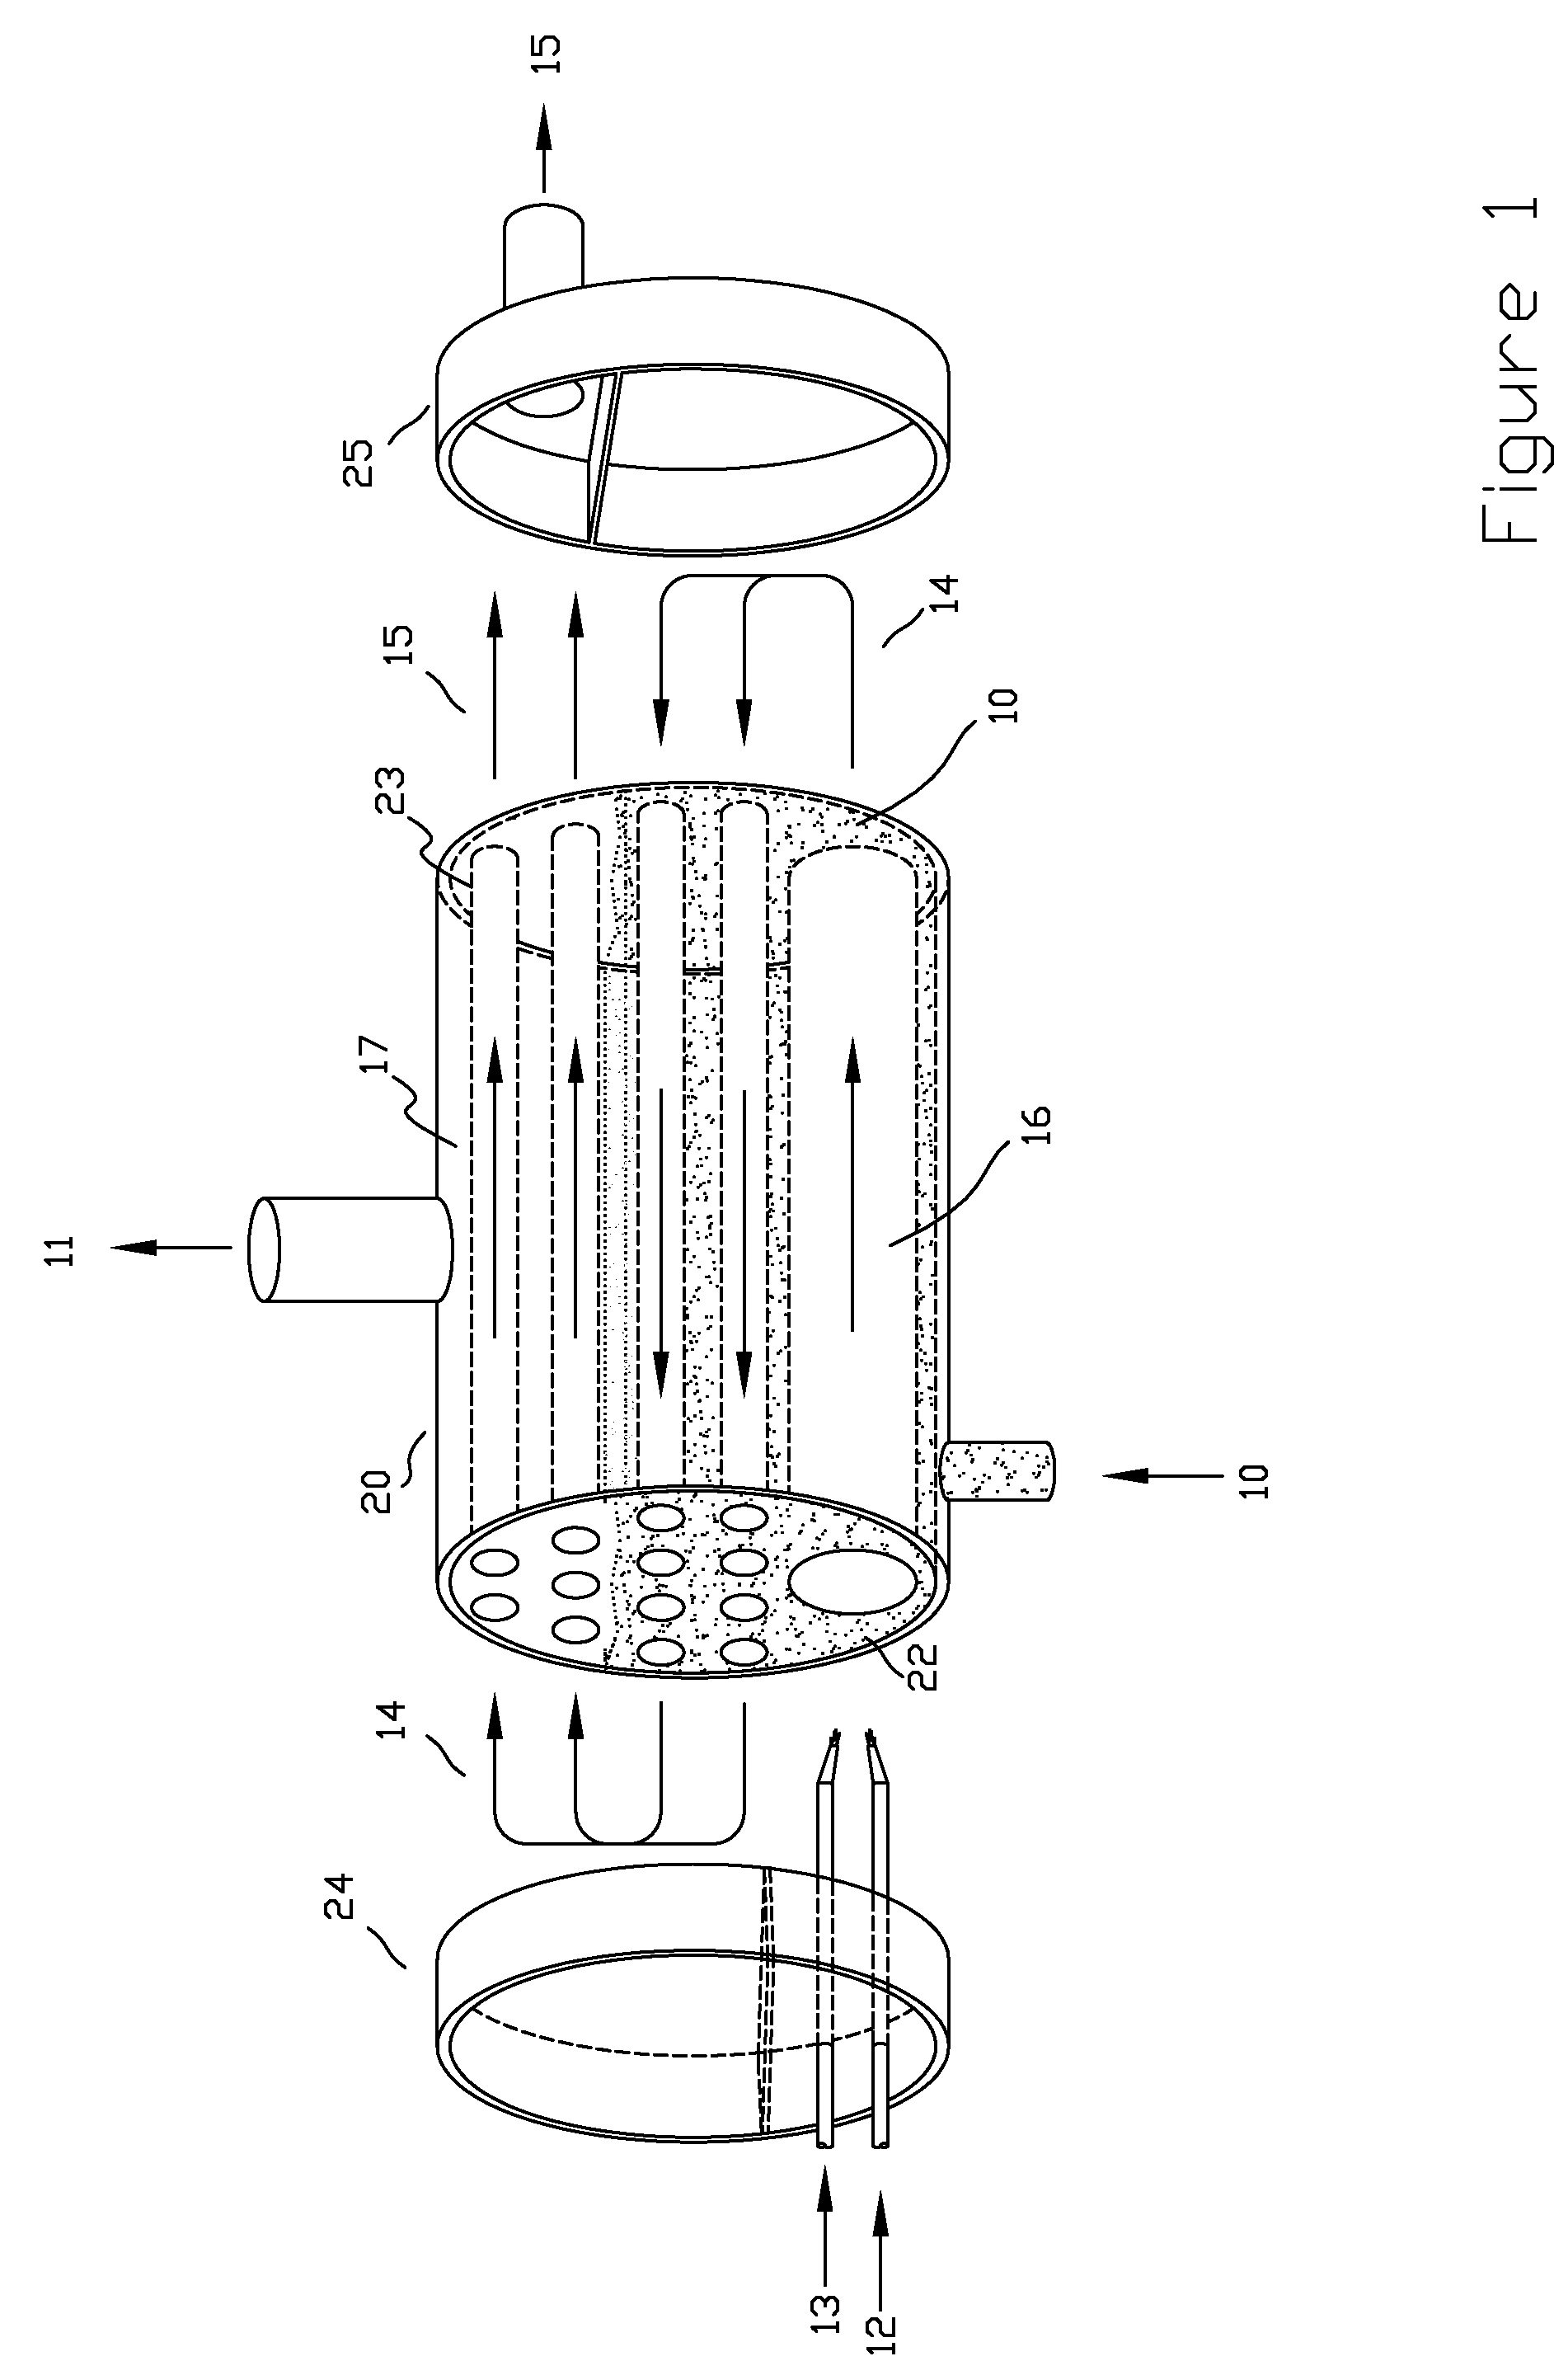 System and Method for Zero Emissions, Hydrogen Fueled Steam Generator